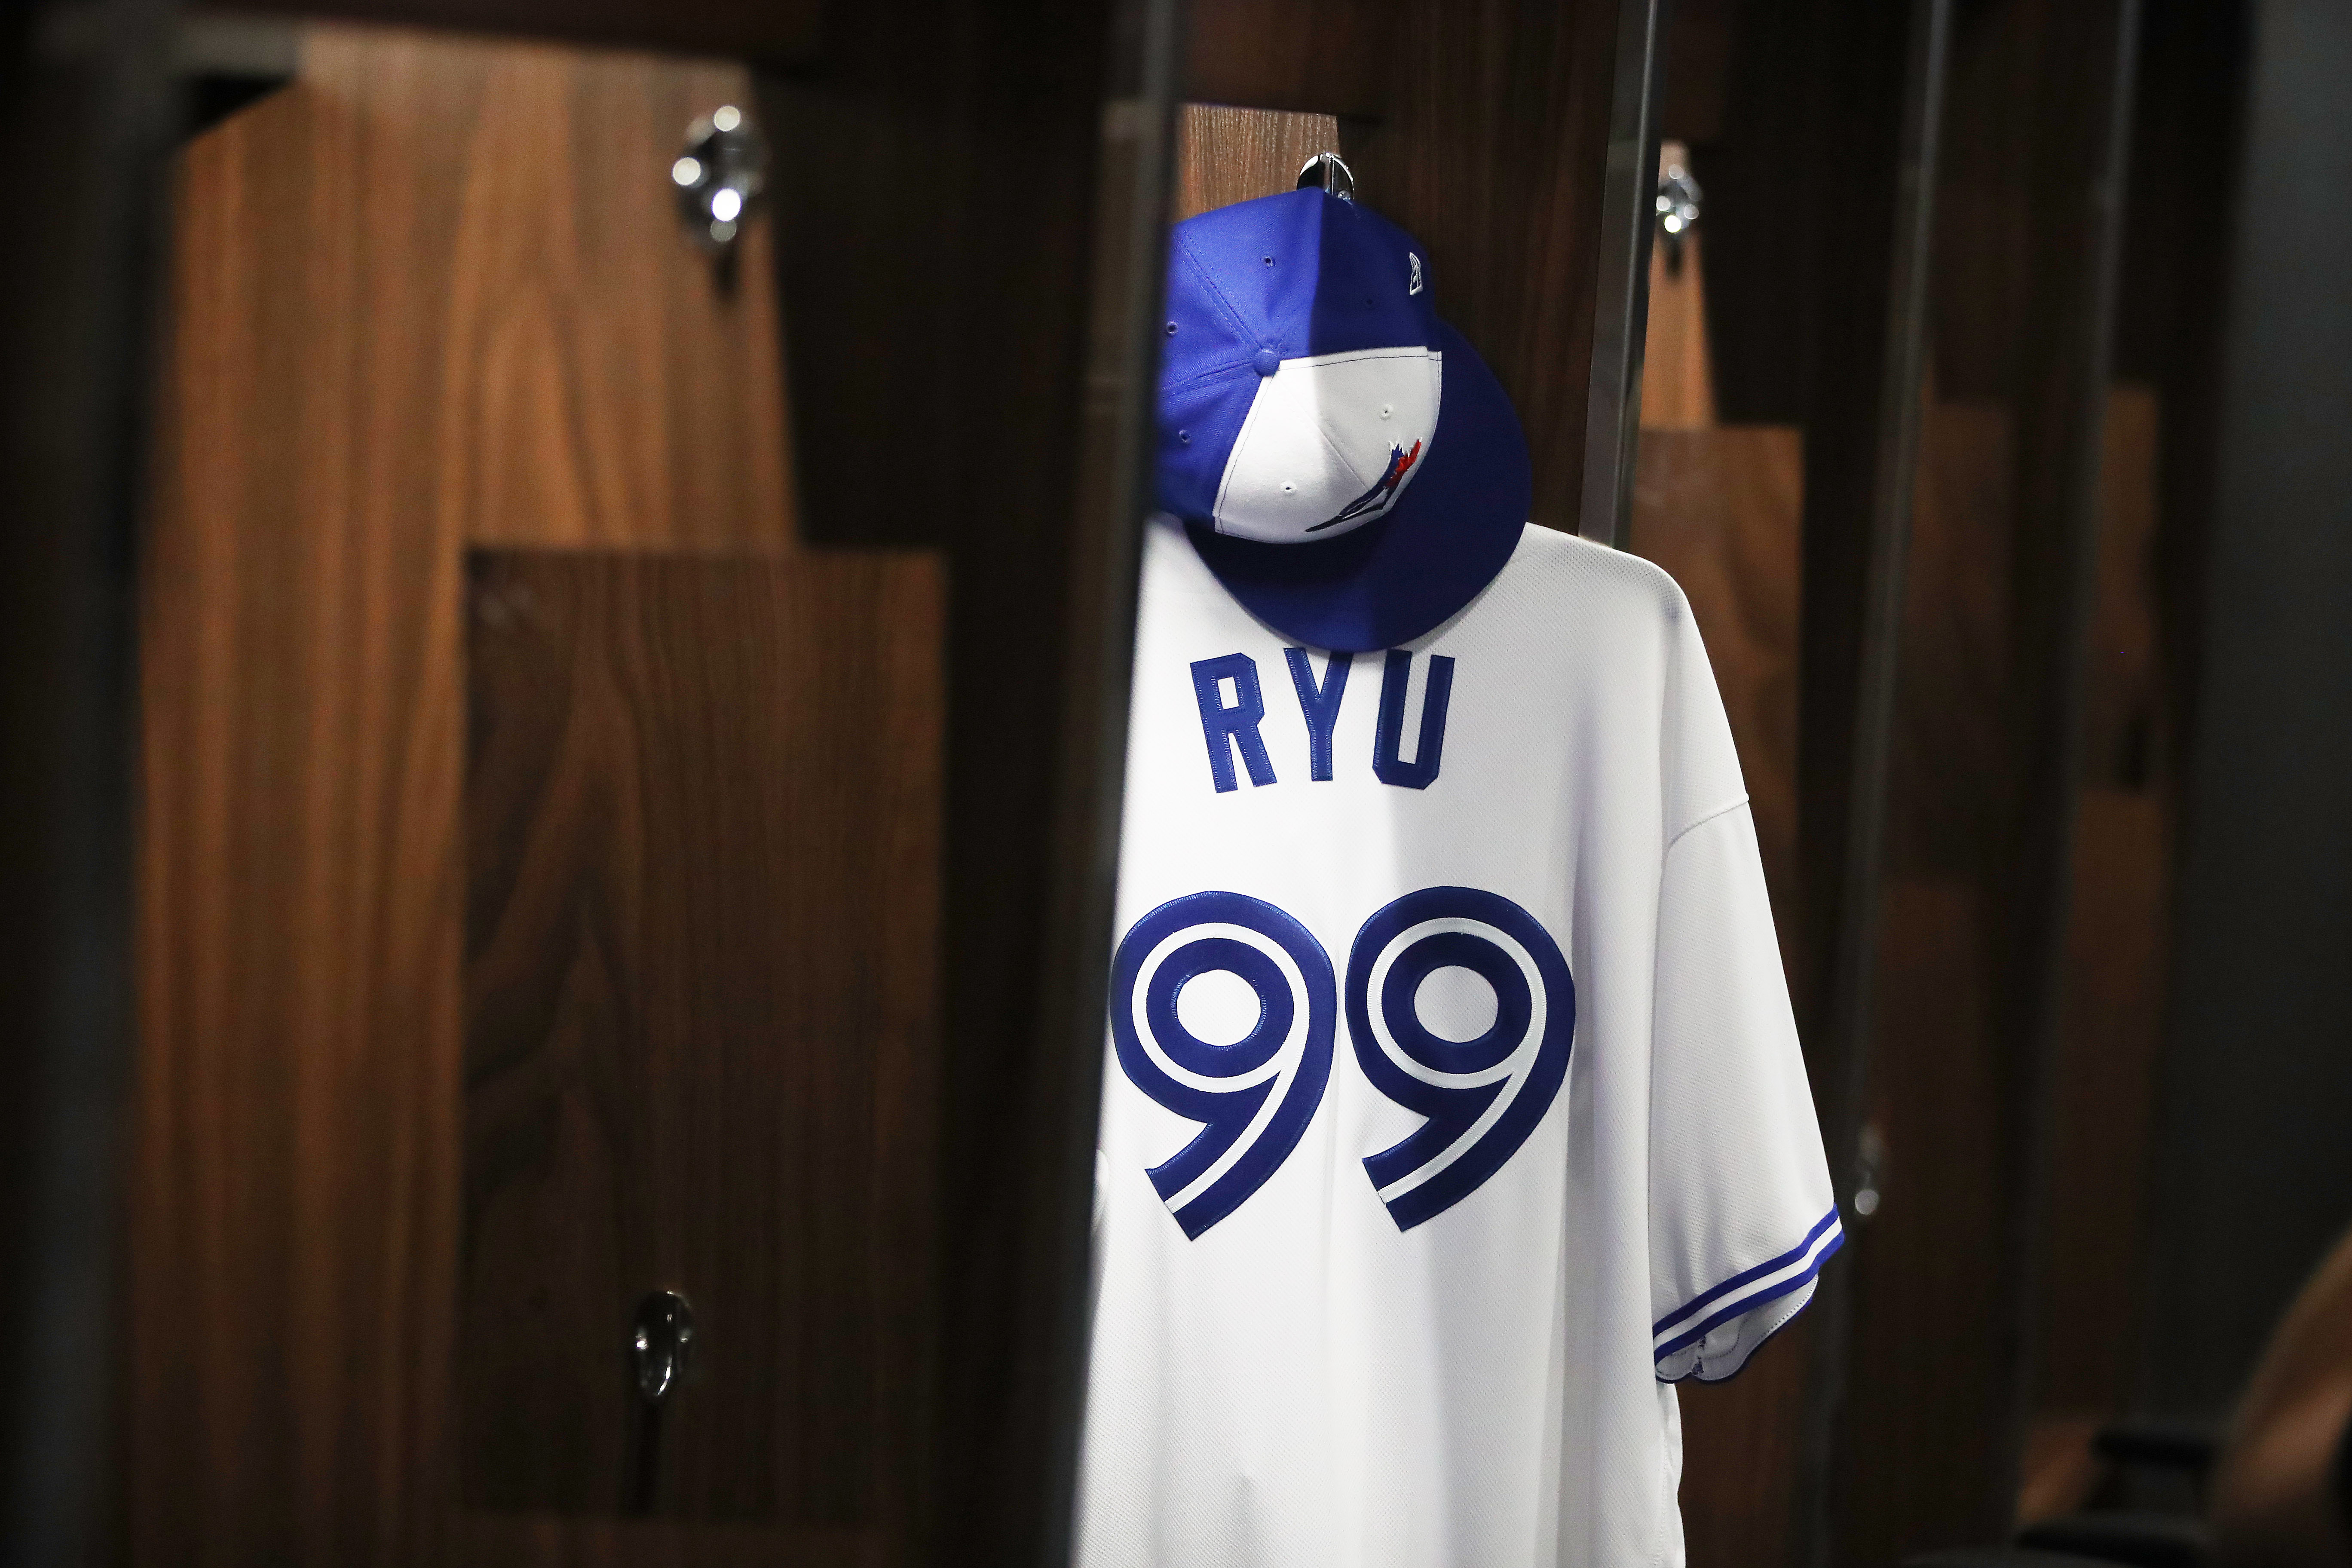 Hyun-Jin Ryu’s #99 white Blue Jays jersey hanging in the clubhouse.